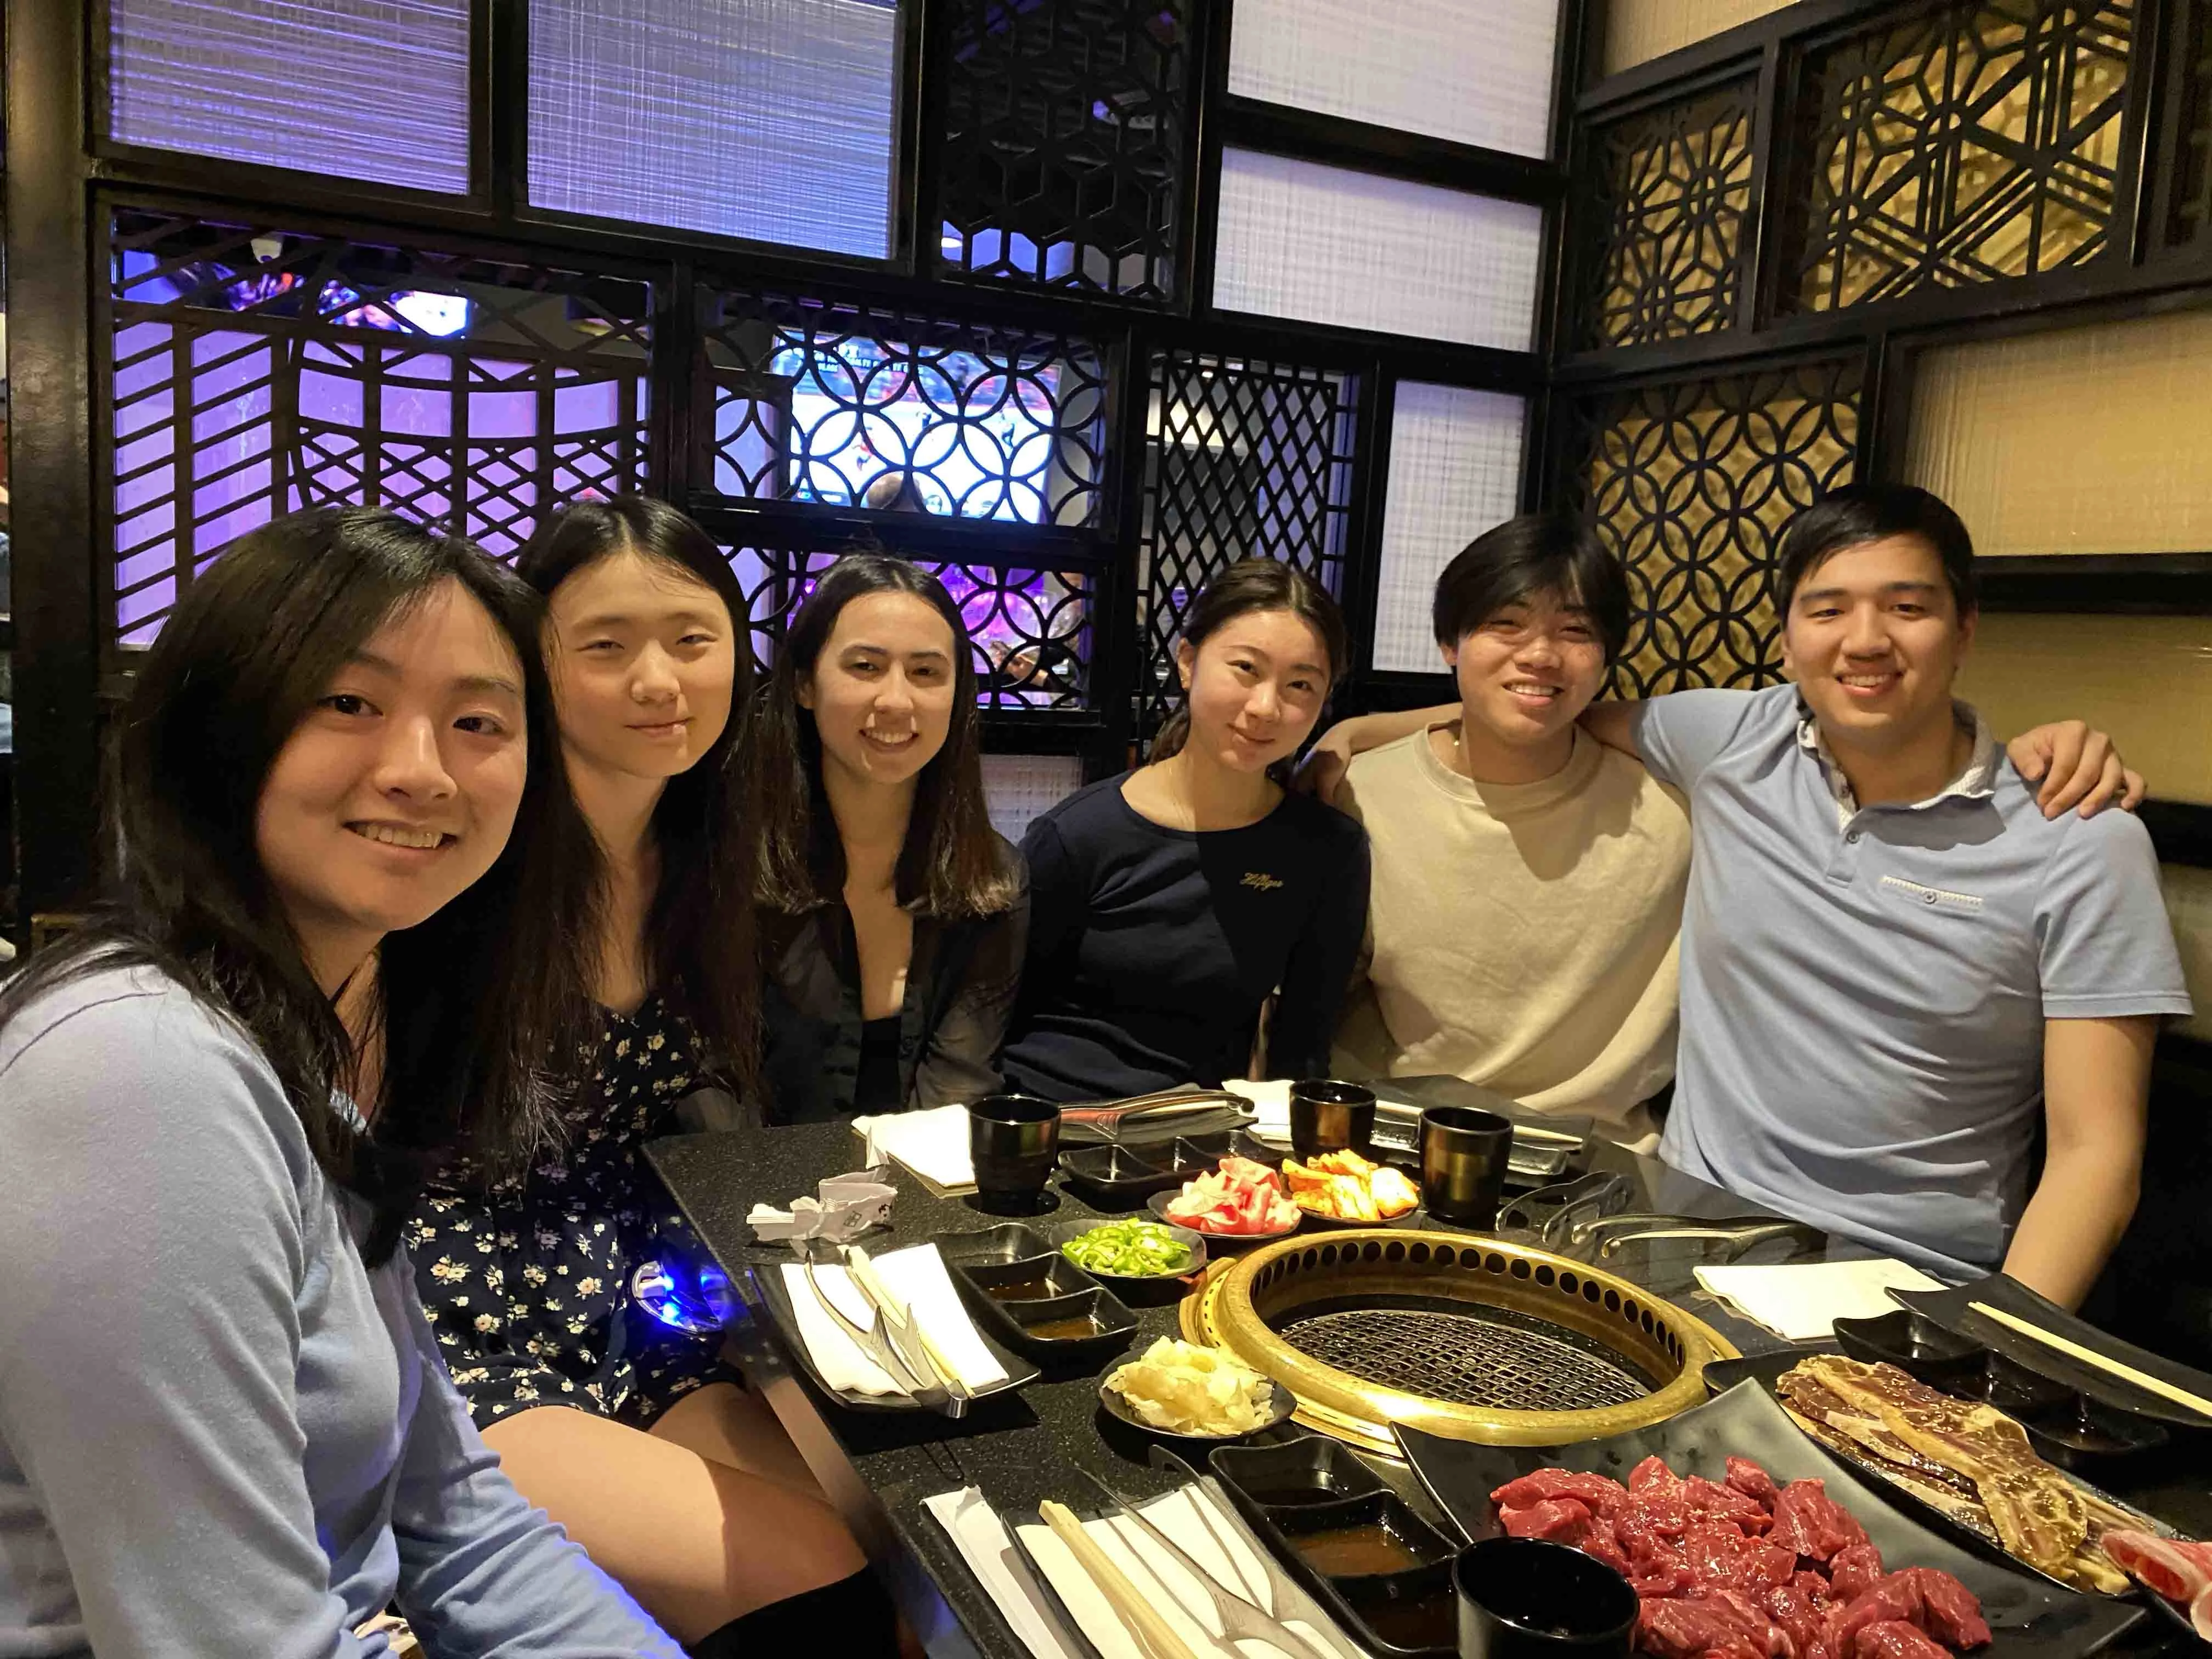 Six undergrad lab members are eating KBBQ together.